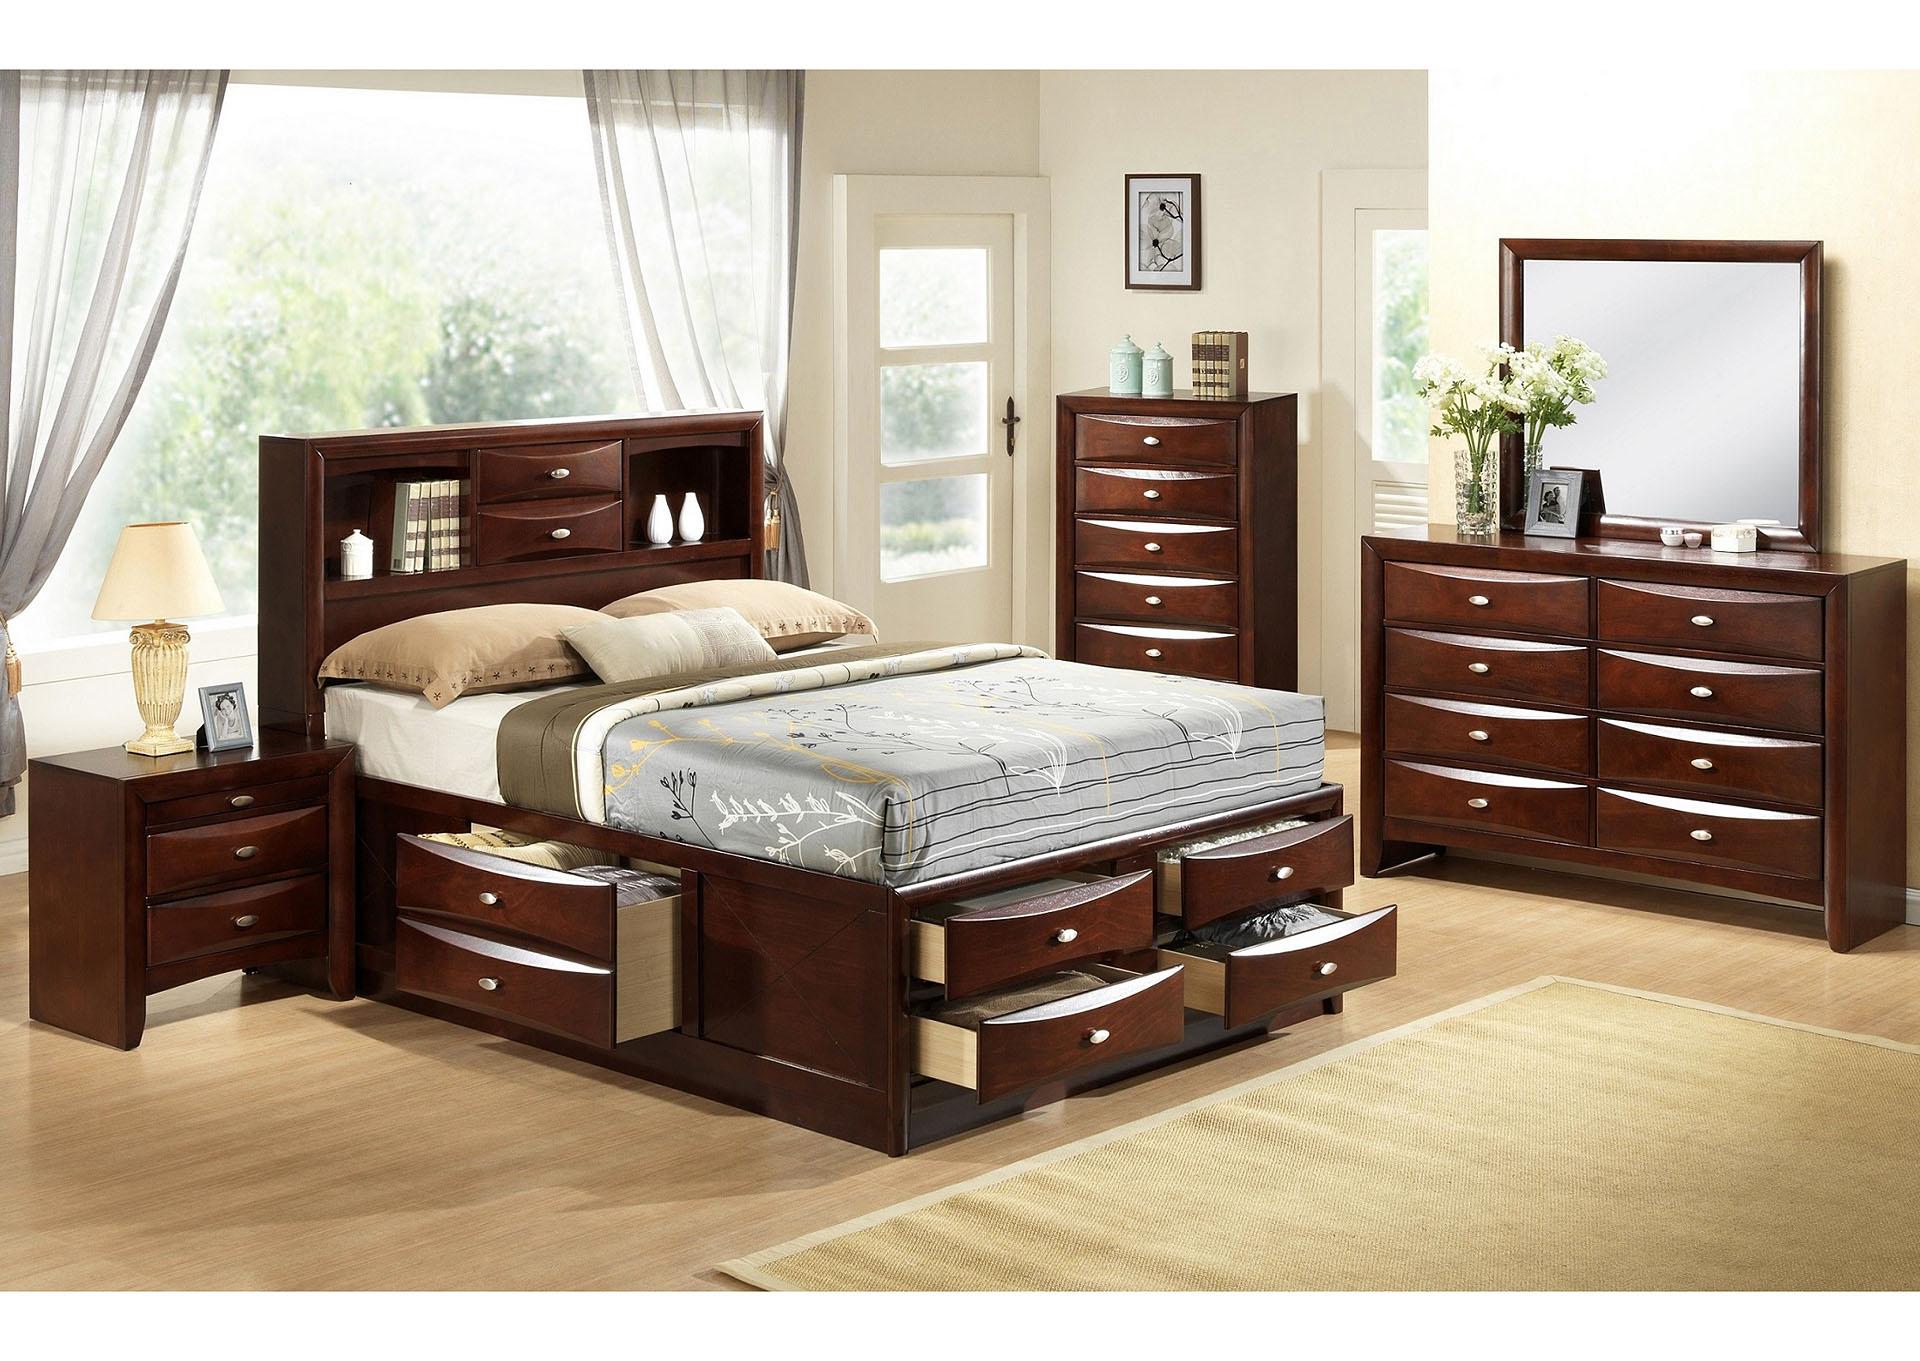 Contemporary, Modern Storage Bedroom Set EMILY GHF-808857938411 in Cherry 